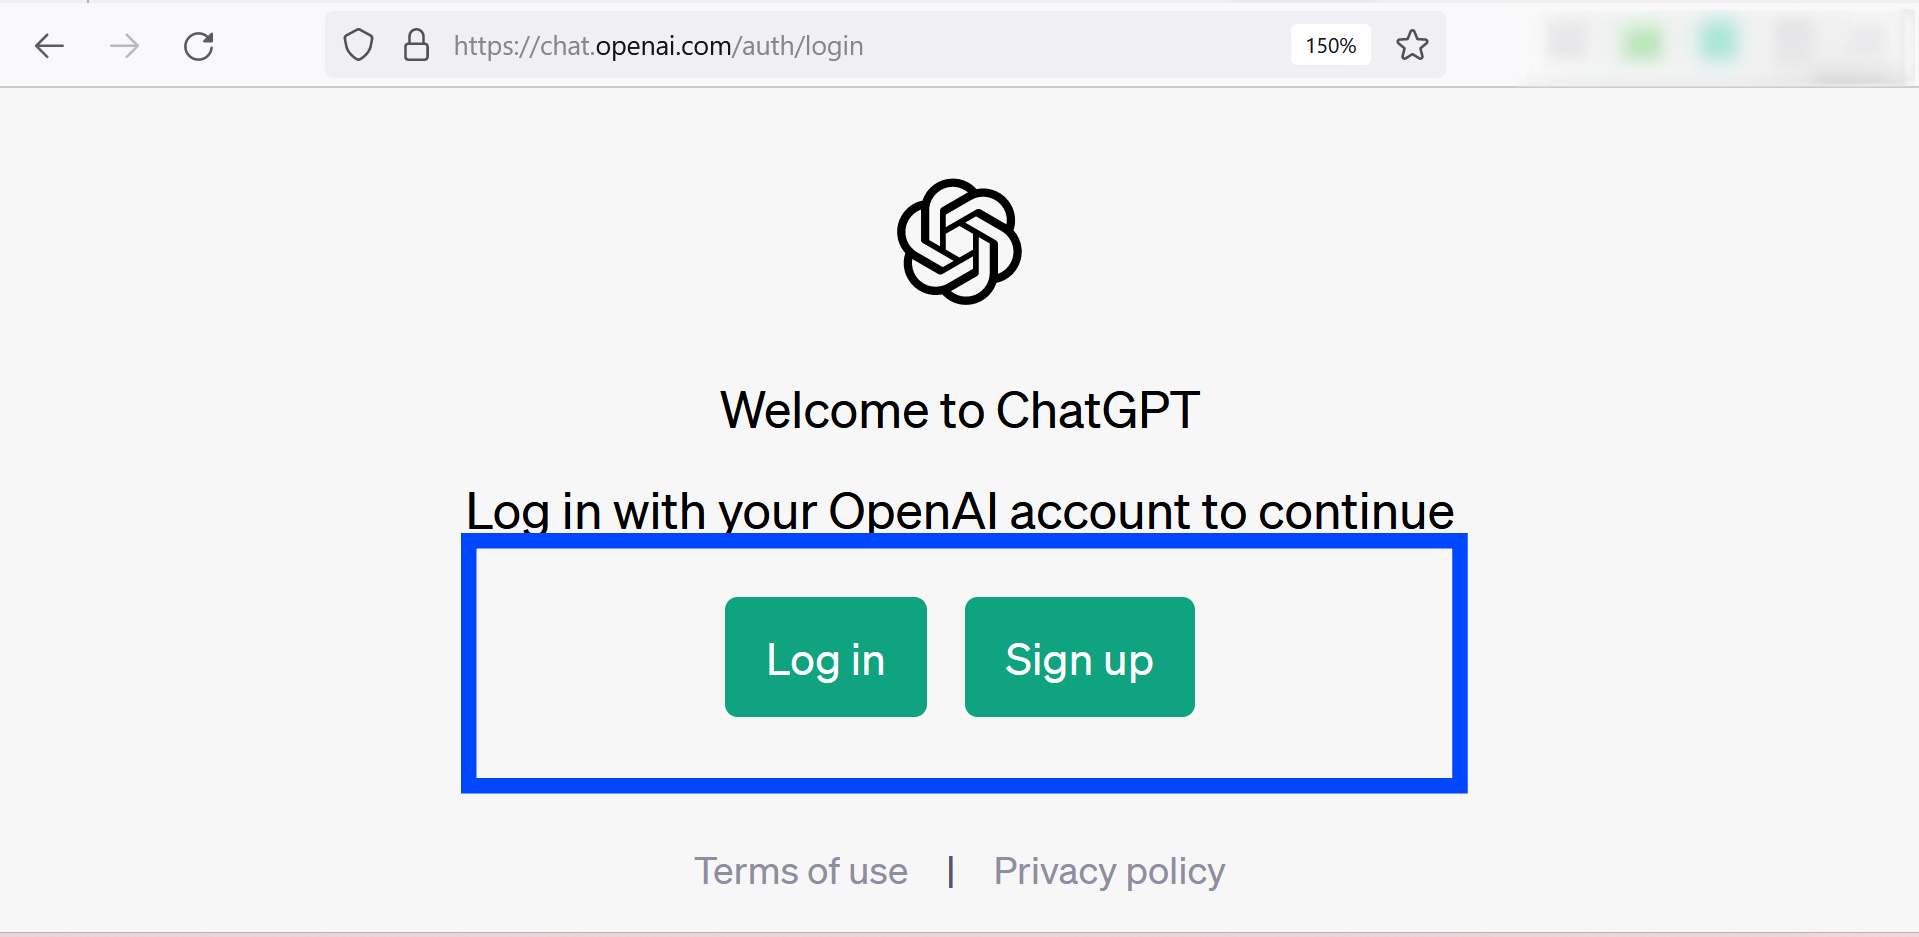 OpenAI Log in and Sign up buttons